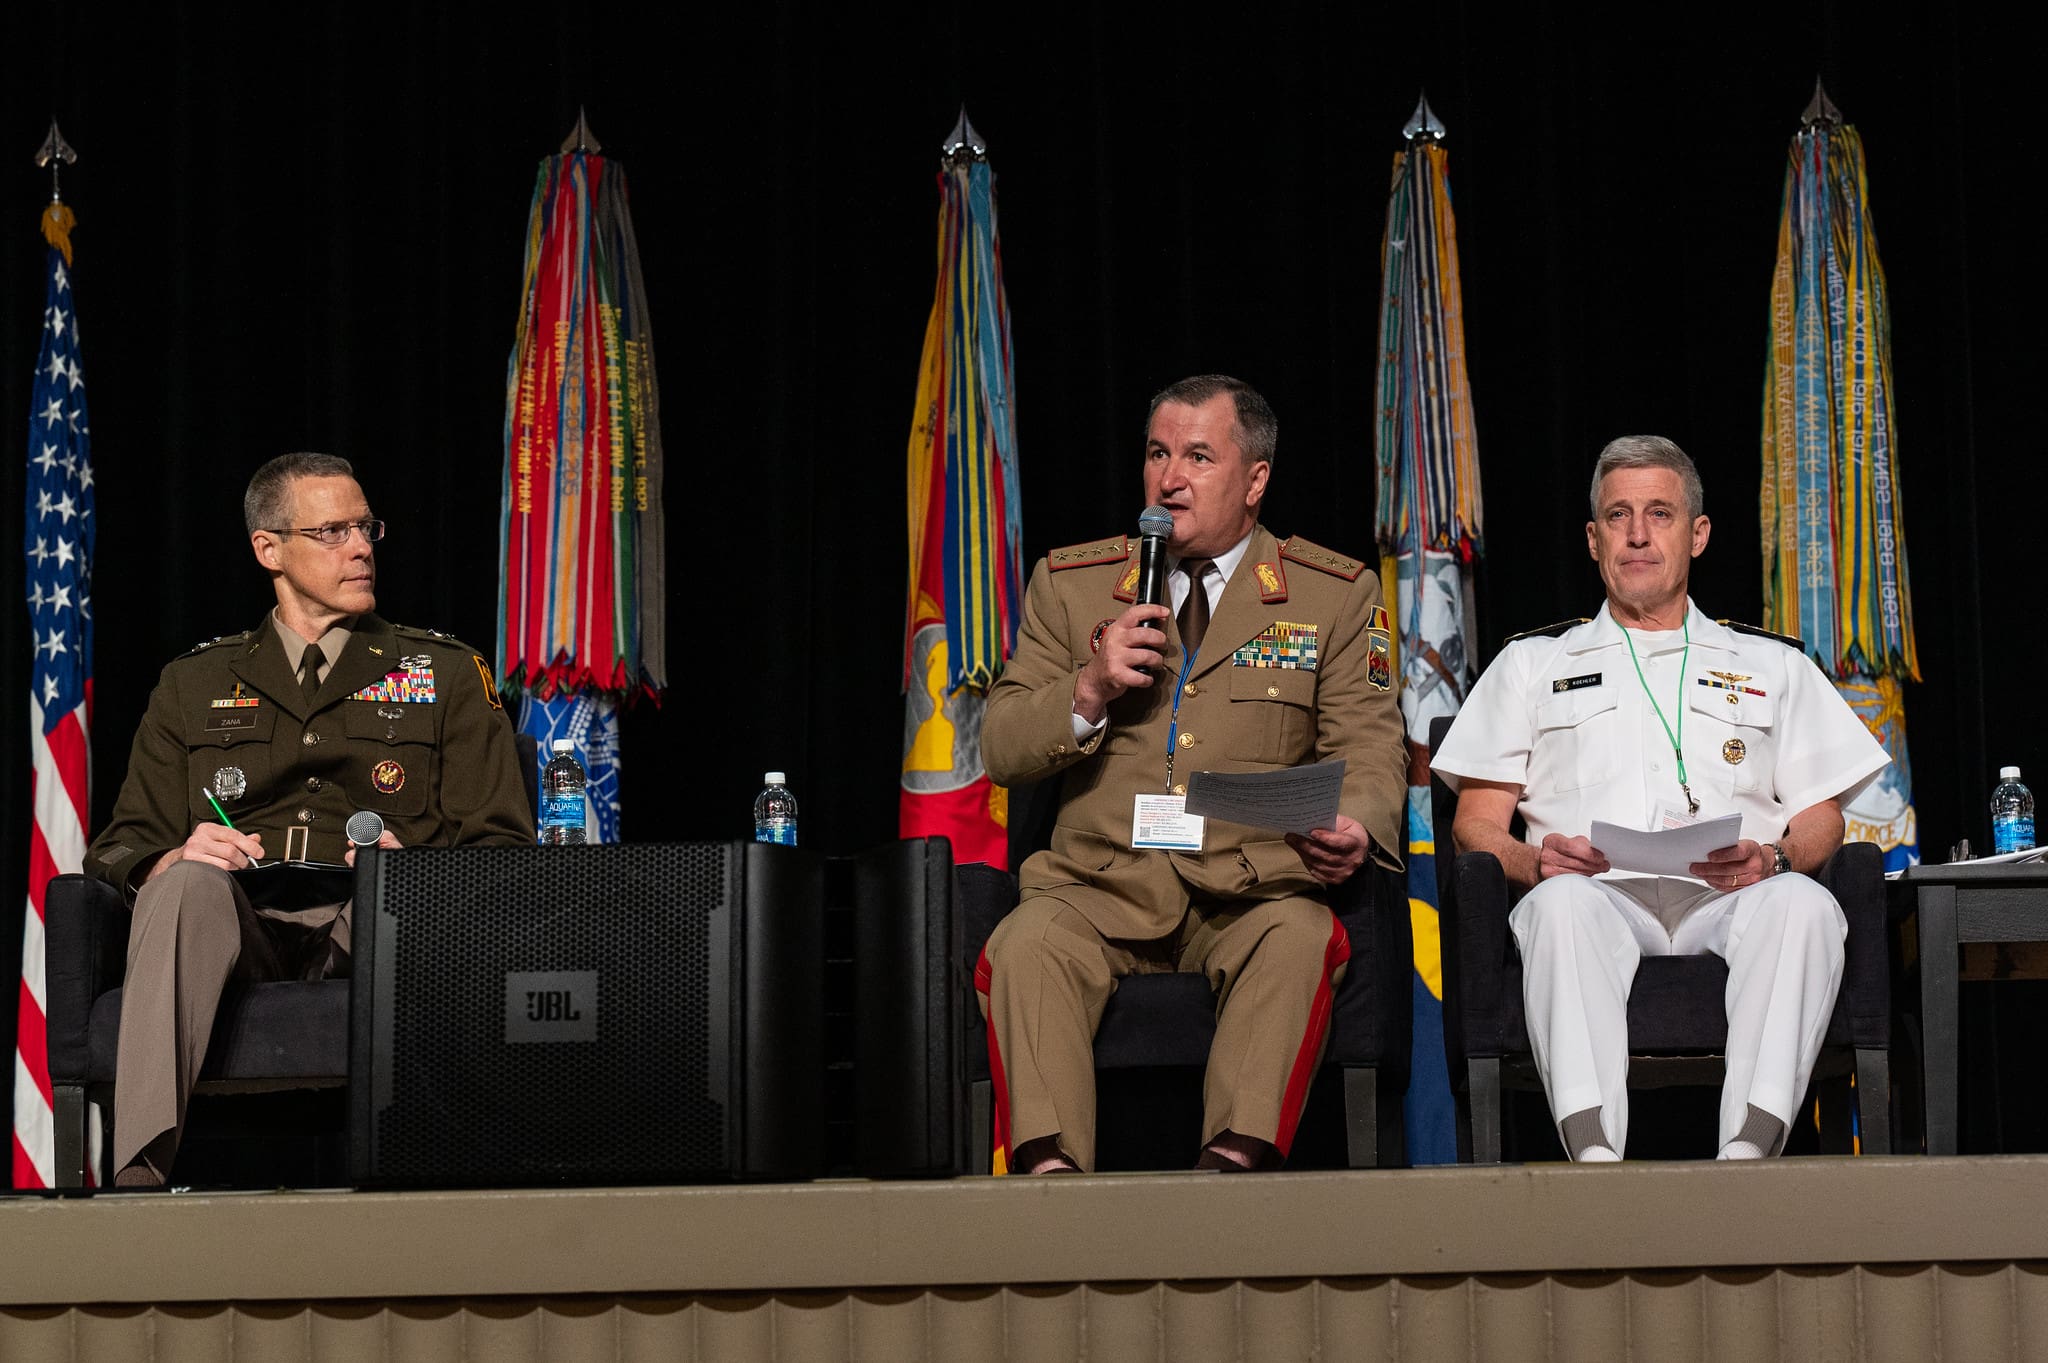 Romanian Gen. Daniel Petrescu, center, chief of defense for the Republic of Romania, speaks during the Department of Defense National Guard State Partnership Program (SPP) 30th Anniversary Conference at National Harbor, Md., July 18. The SPP pairs Guard elements with partner nations worldwide, building enduring relationships through mutual training exchanges that strengthen security, improve interoperability and enhance the readiness of U.S. and partner forces. Established in July 1993, the program began with less than a dozen partnerships and has grown to include 100 countries representing more than 50 percent of the world’s nations. Air National Guard photo by Tech. Sgt. Sarah M. McClanahan